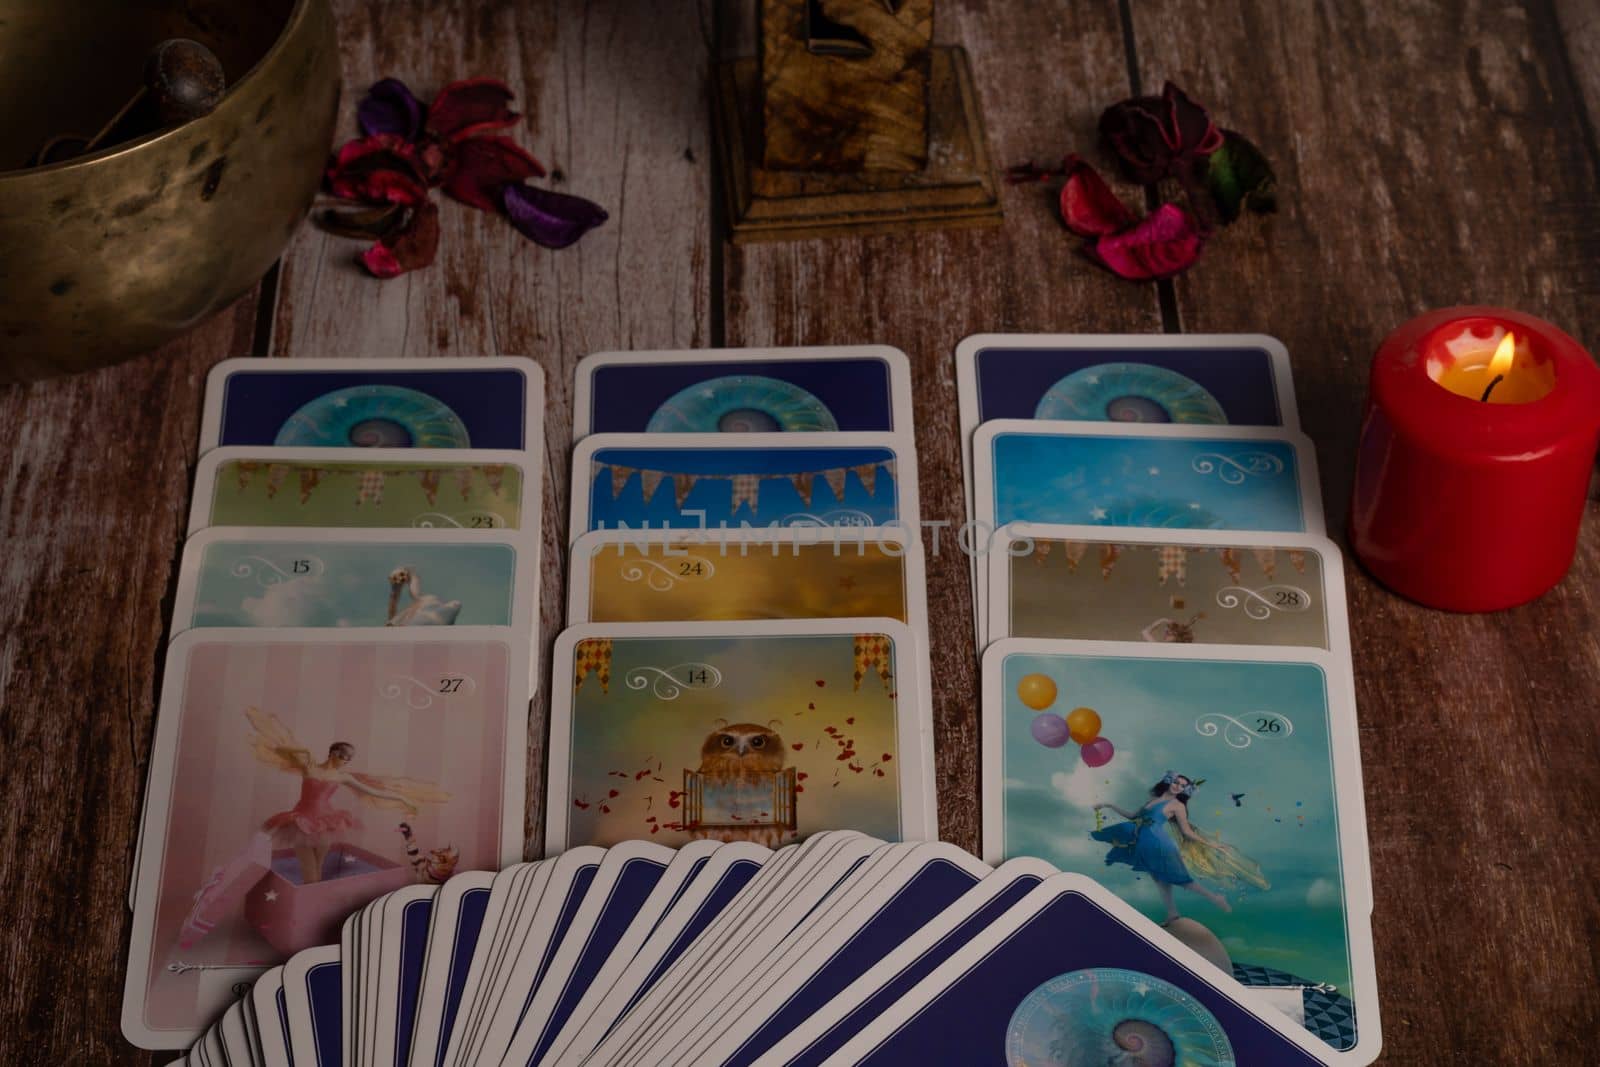 colorful tarot cards "oracle" lighted red candle and Tibetan bowl on a wooden table with copy space